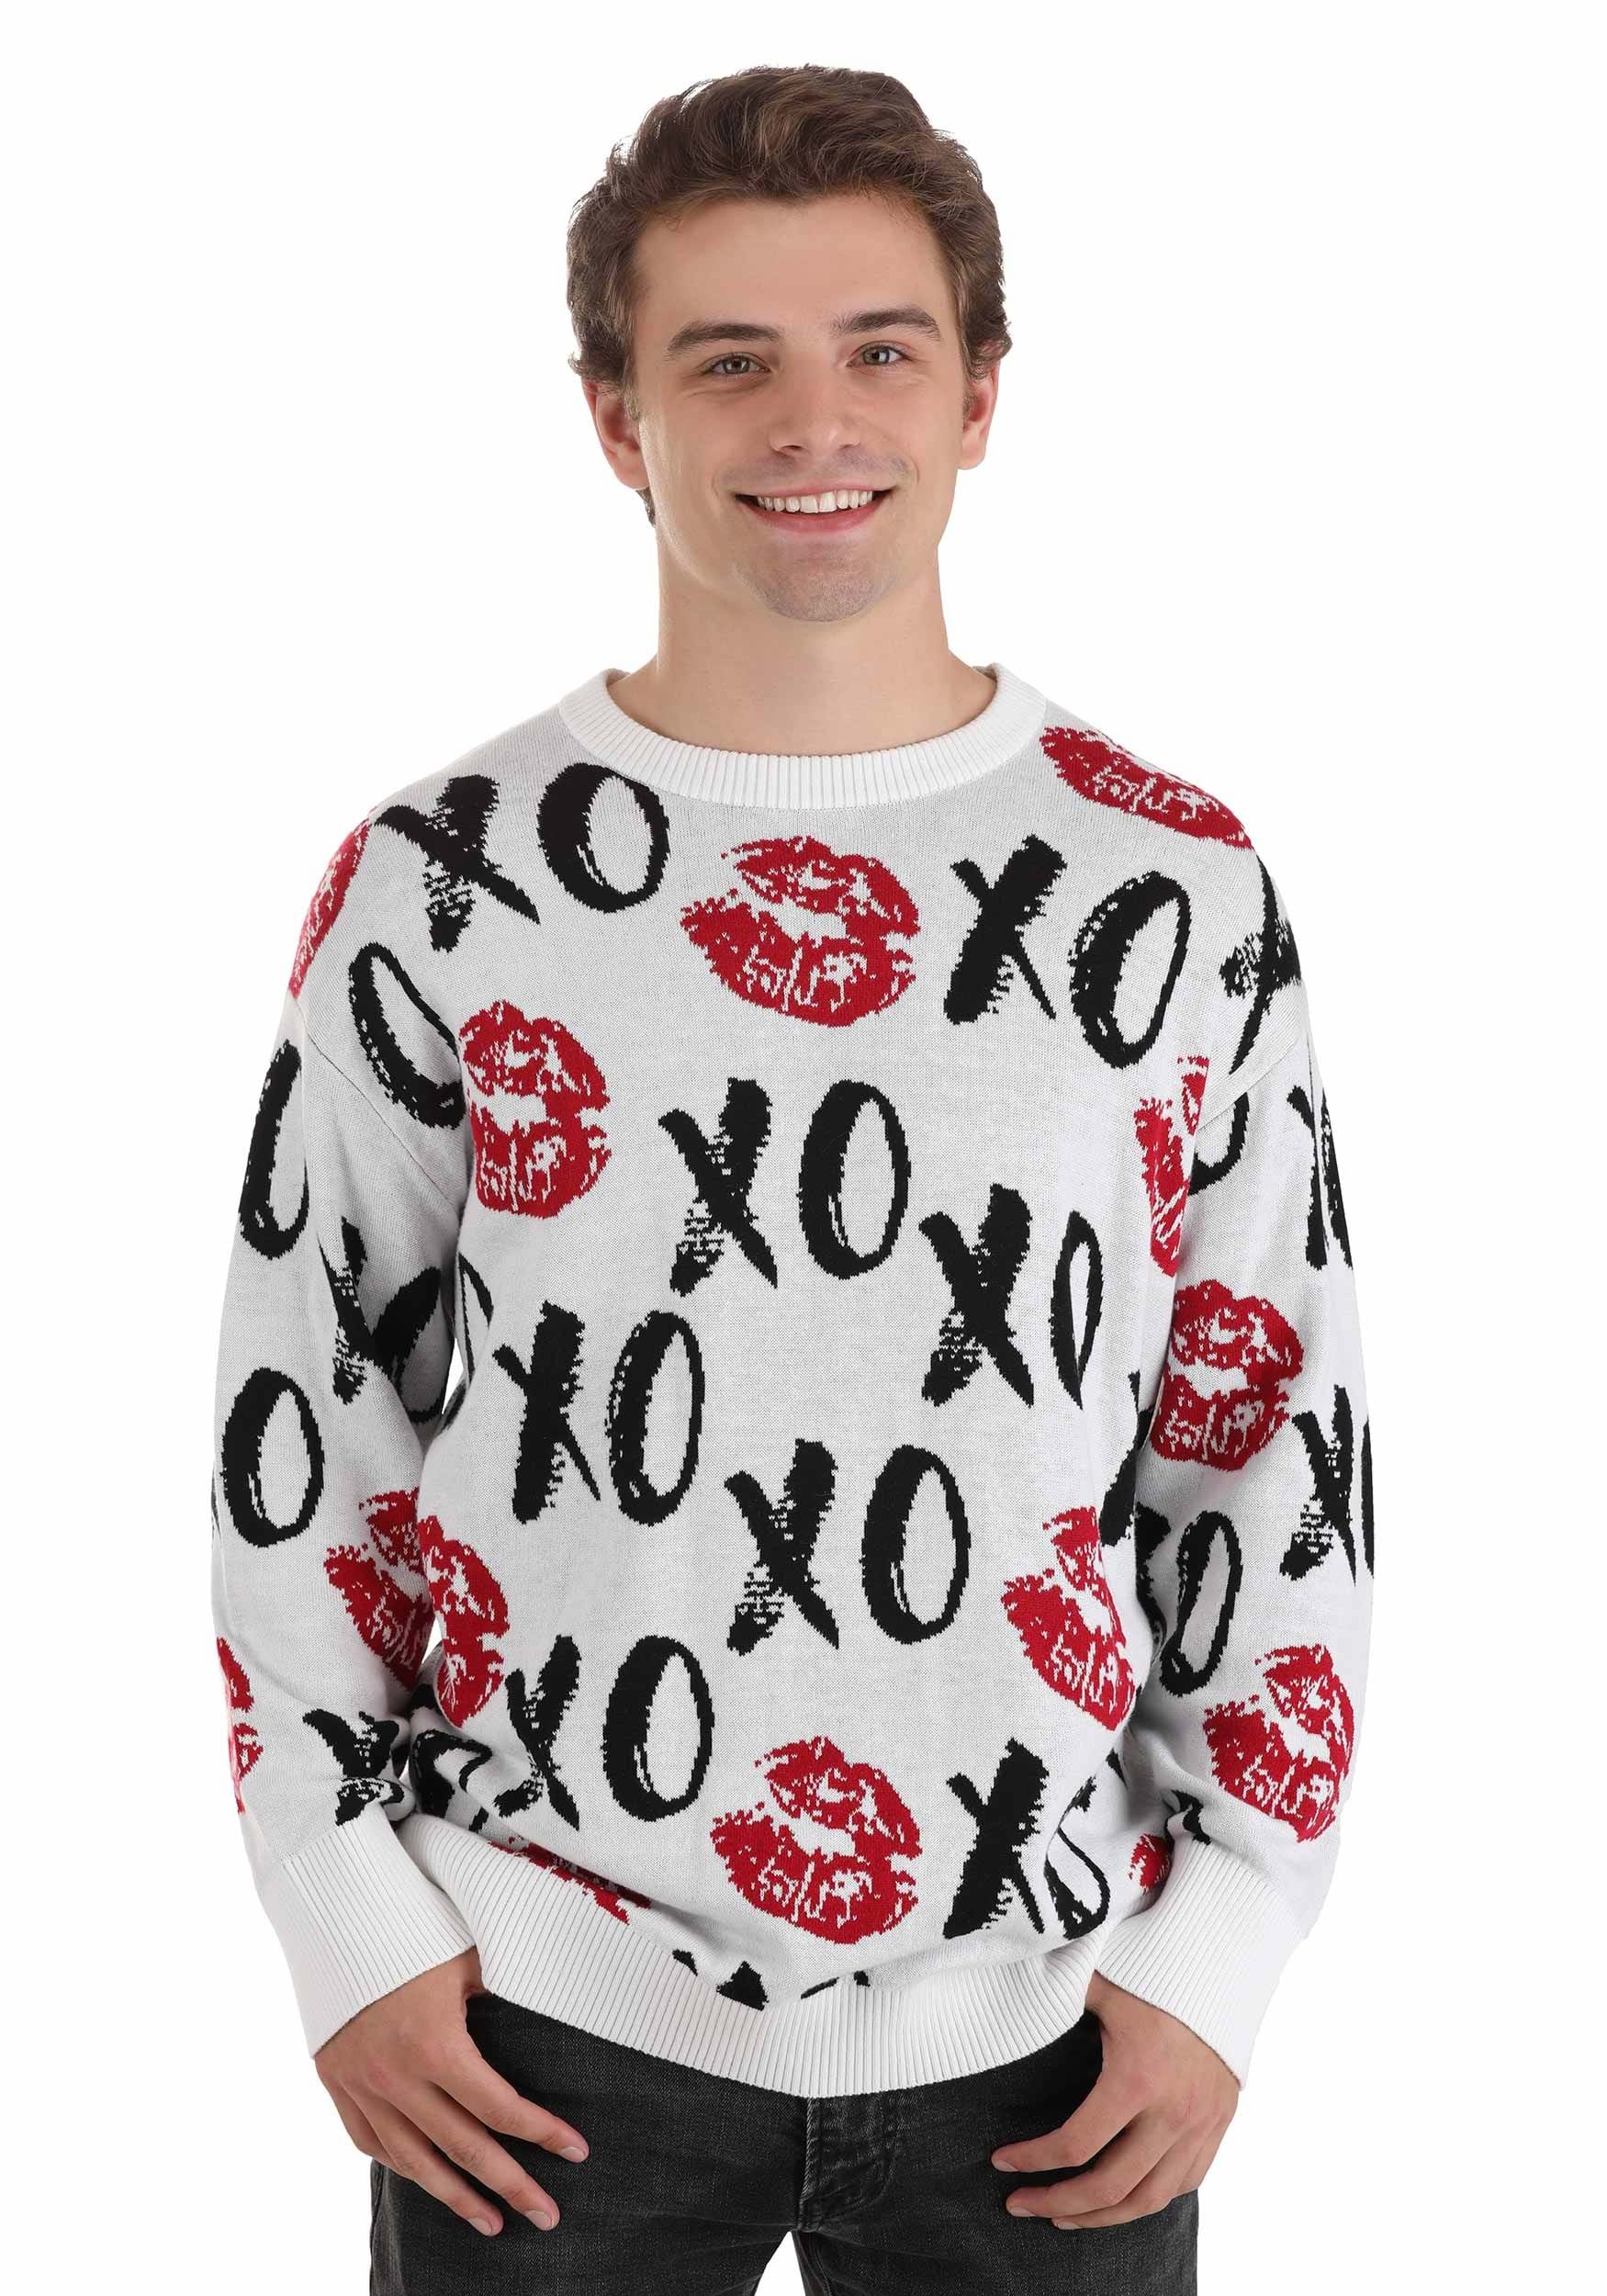 Photos - Fancy Dress A&D FUN Wear Hugs and Kisses Valentine's Day Sweater | Valentines Day Apparel 